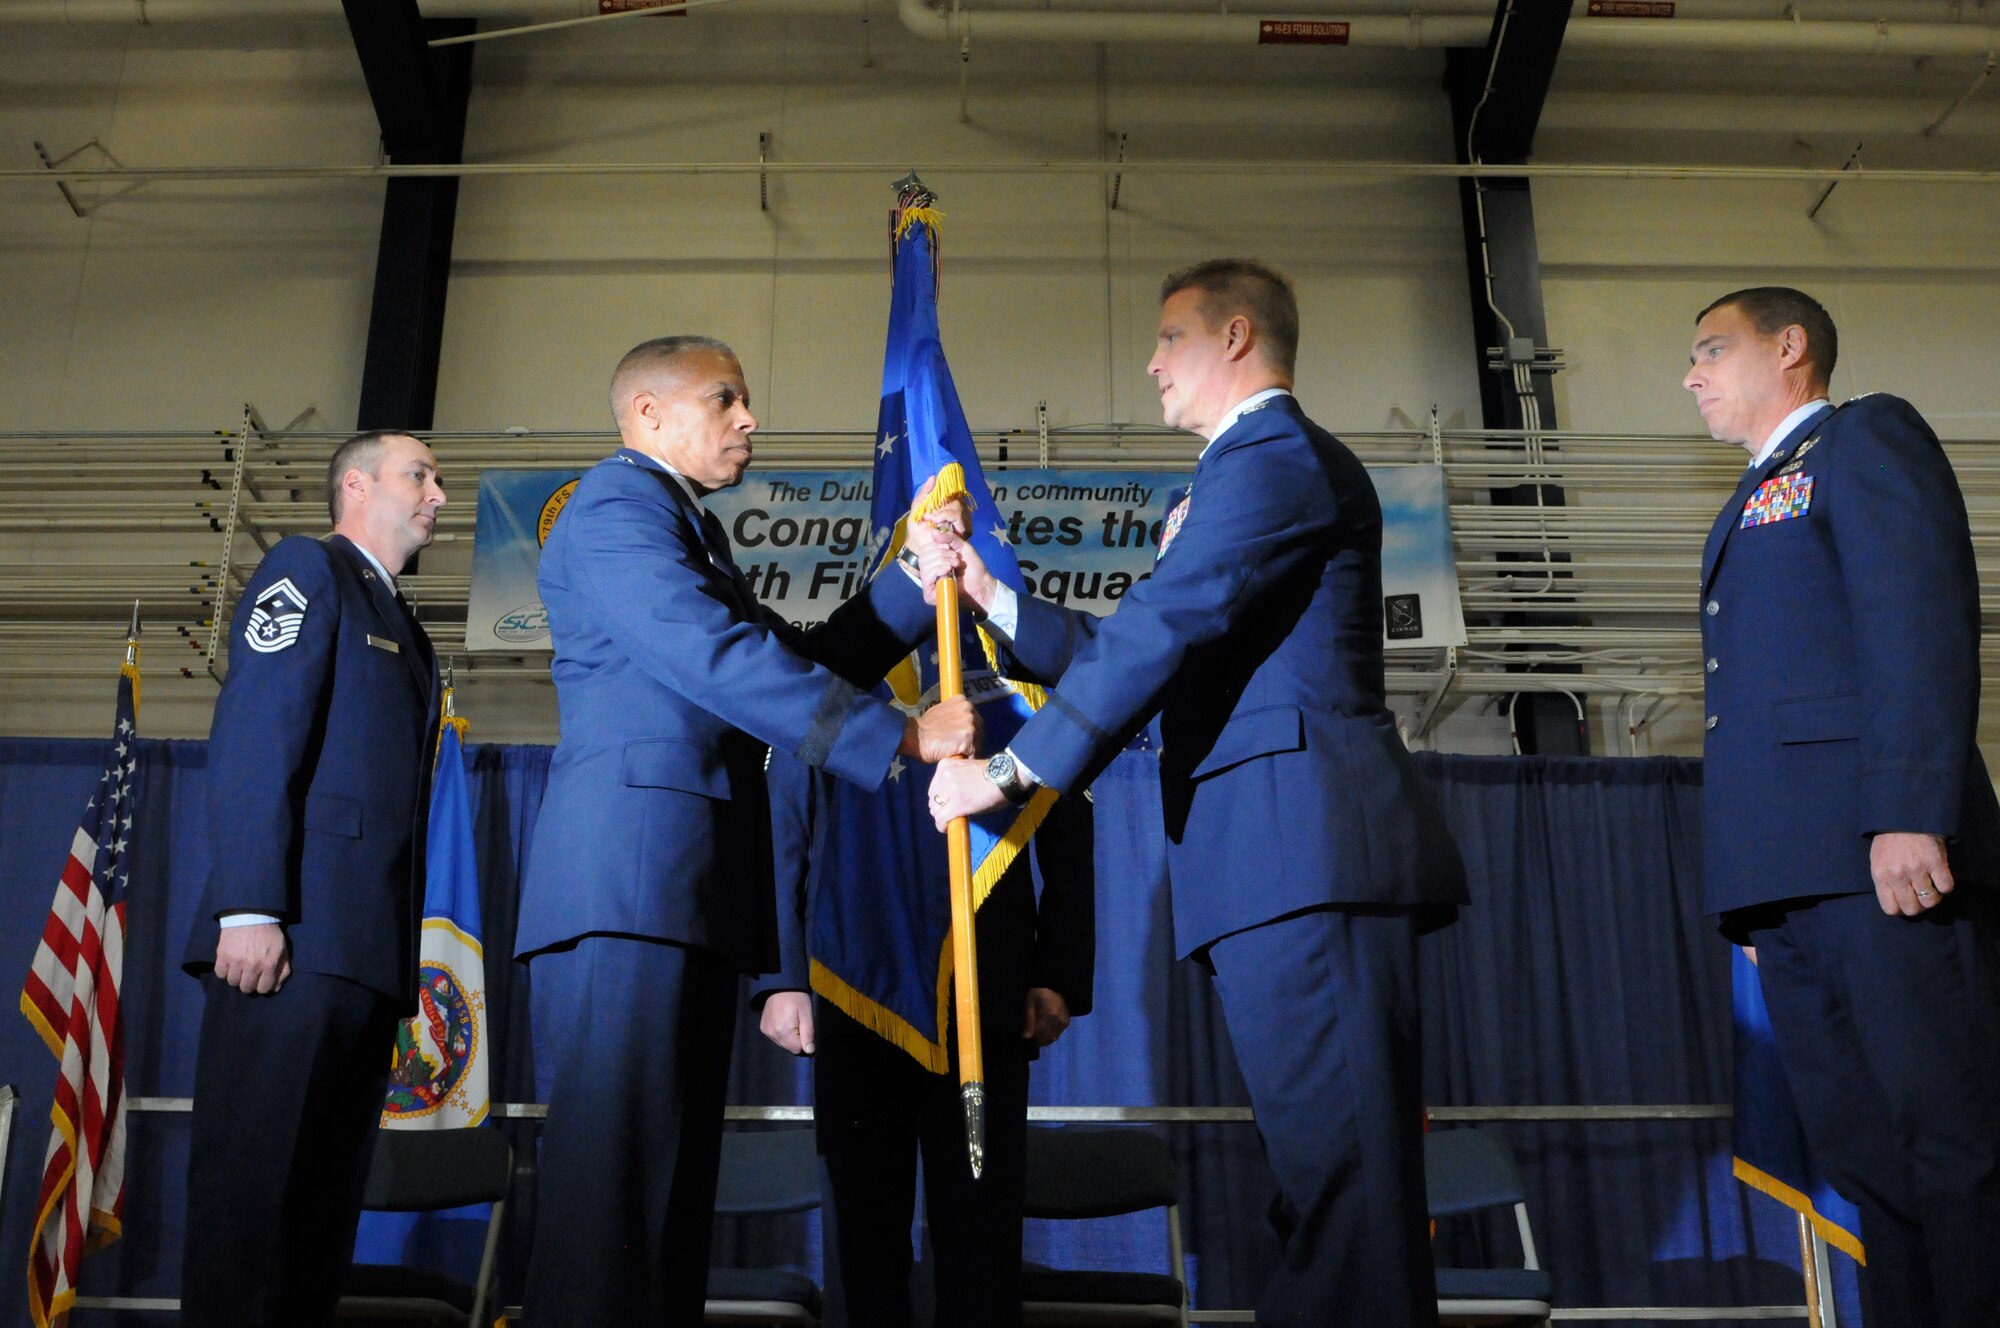 Col. Jon S. Safstrom accepts command of 148th Fighter Wing, Duluth, Minn. from  Brig. Gen. David D. Hamlar, Assistant Adjutant General, Minnesota National Guard, Nov. 14, 2015. Safstrom assumed command from Col. Frank H. Stokes who accepted a position at the National Guard Bureau, Arlington, Va. (U.S. Air Force photo by Tech. Sgt. Amie Muller/released)